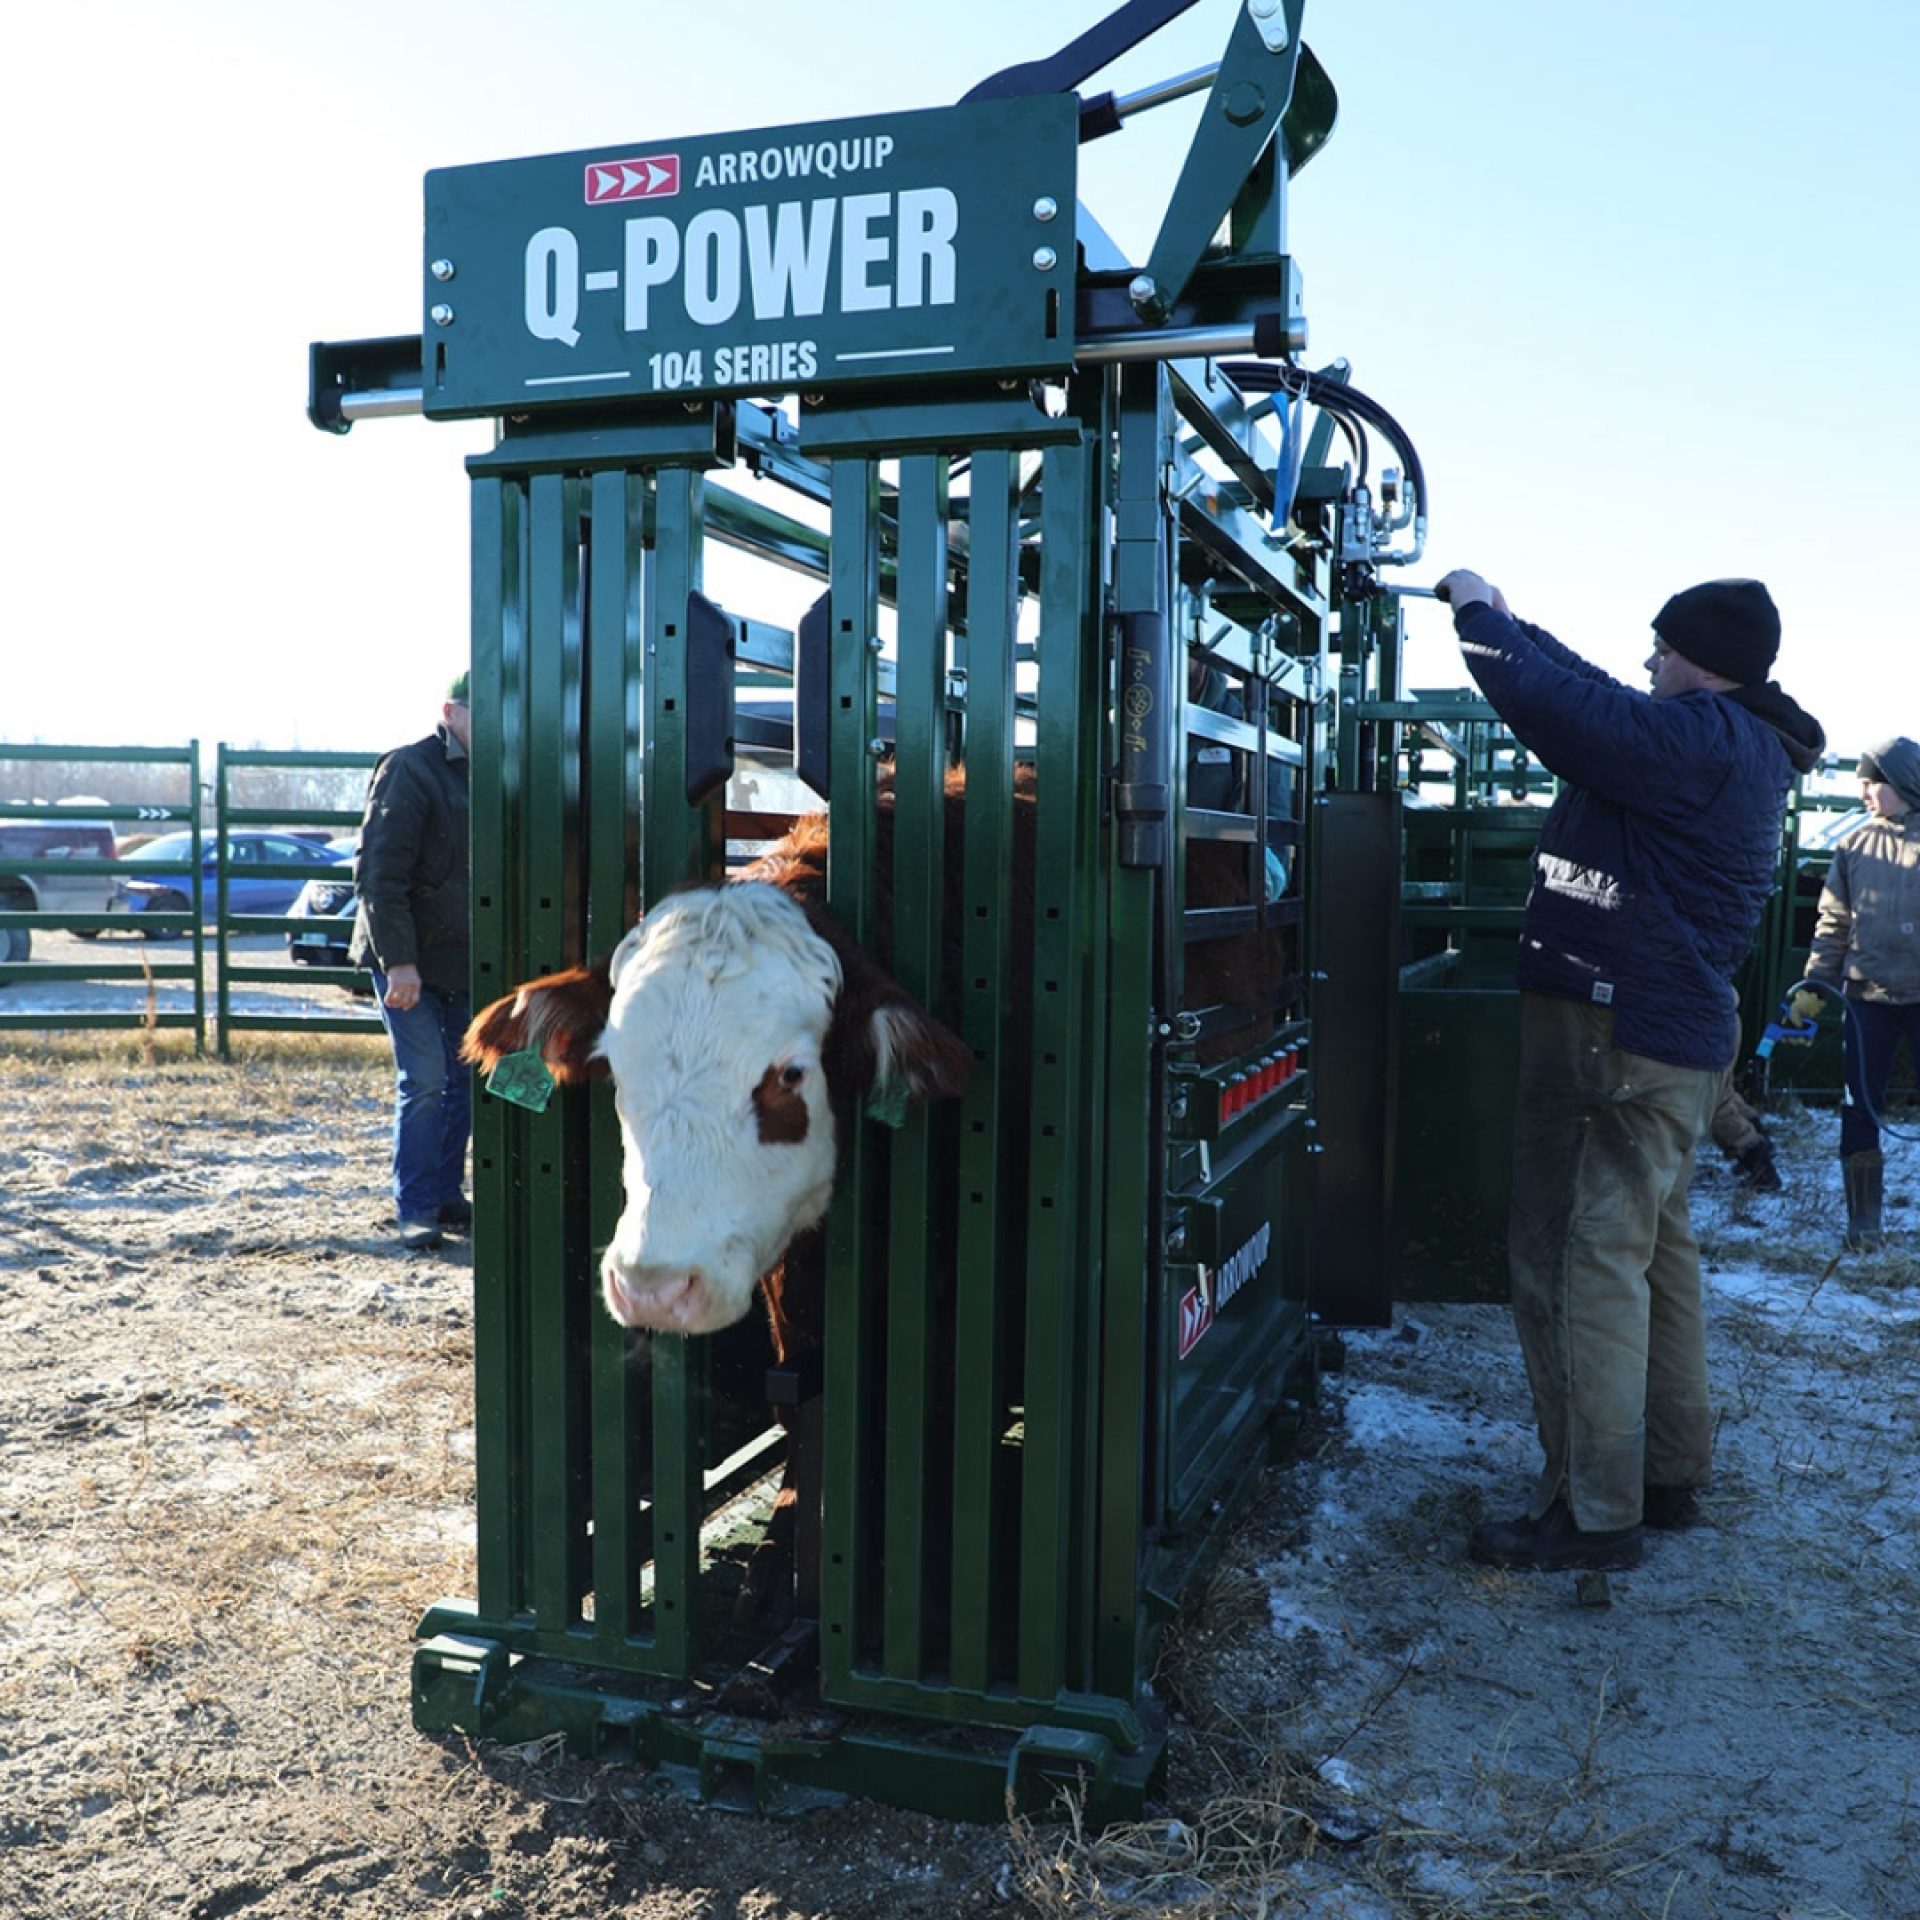 Q-Power 104 Series hydraulic chute with cow caught in the cattle head gate for preg checking